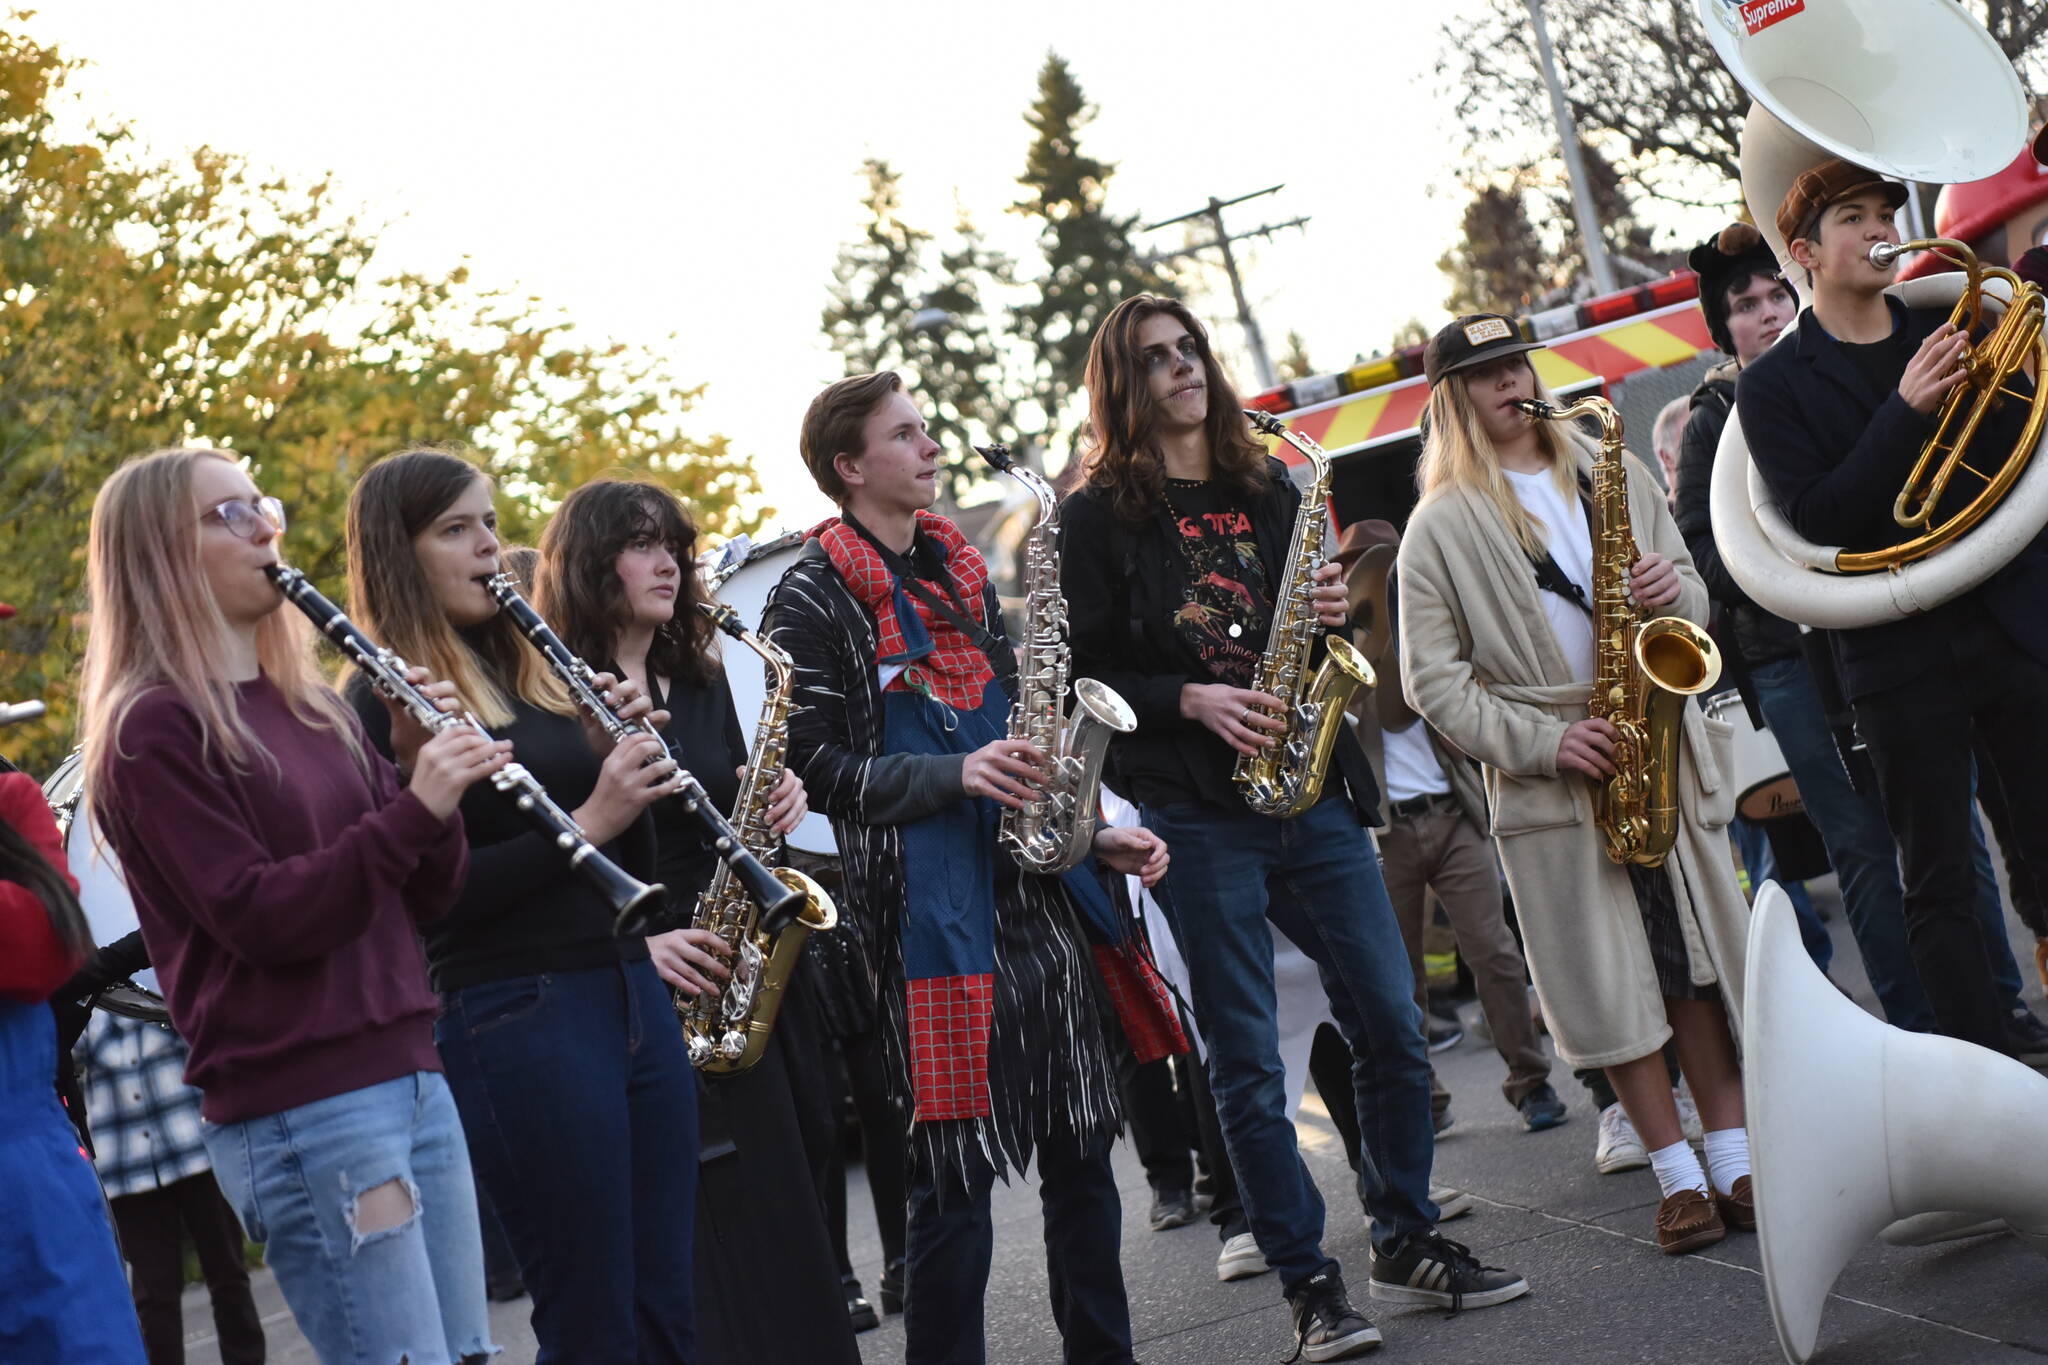 The Bainbridge High School band performs for all the creatures out on Fright Night.